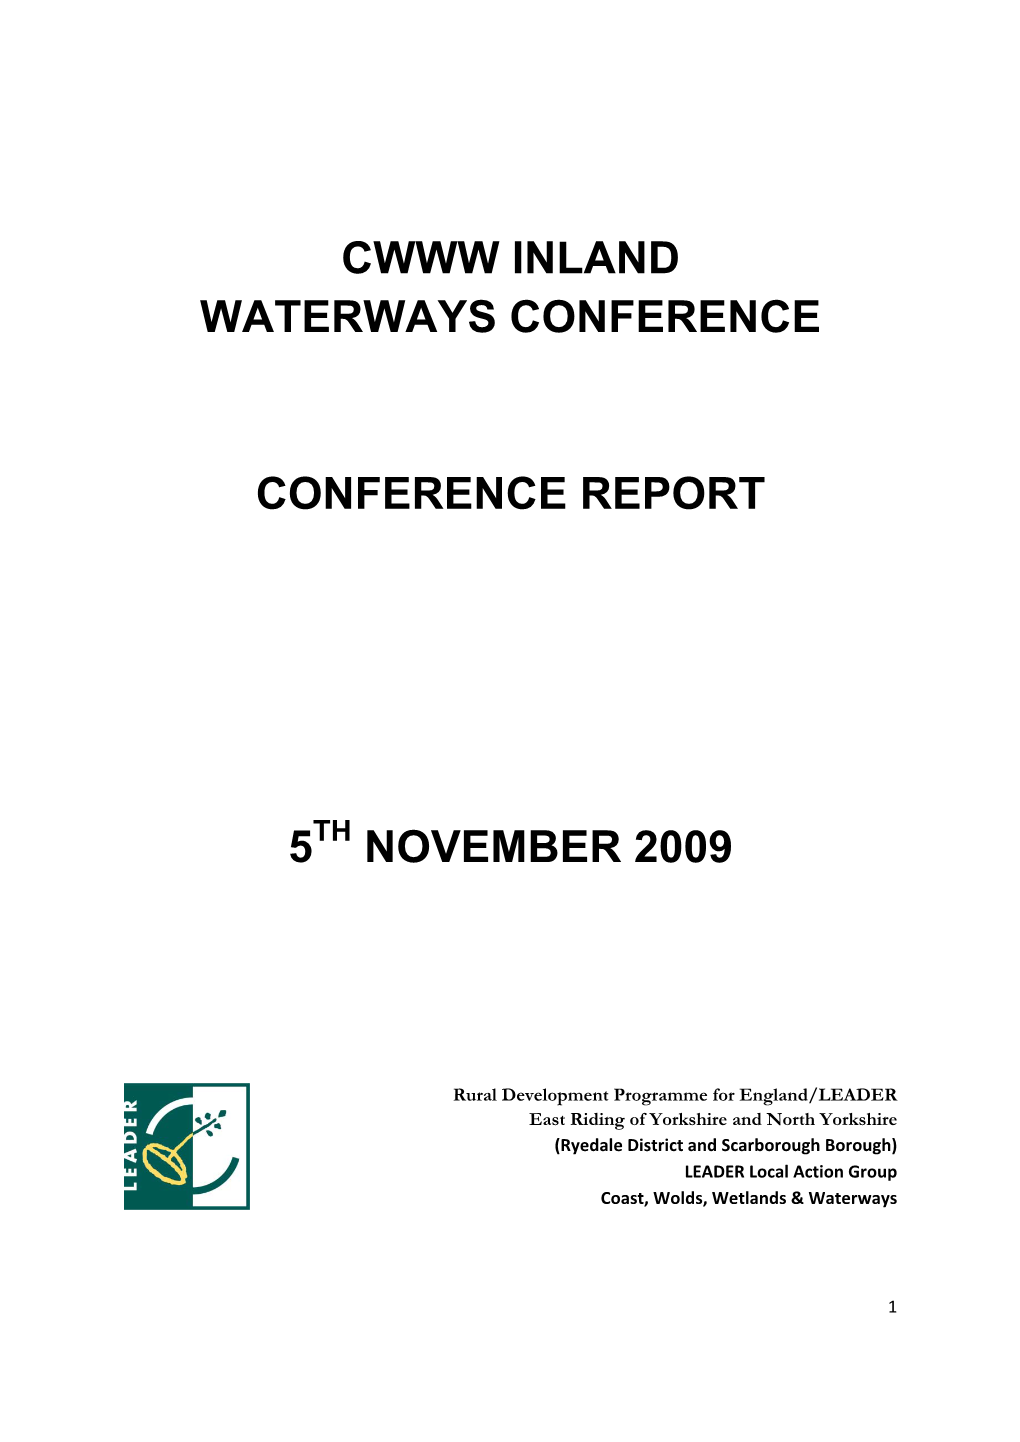 CWWW Waterways Conference Report